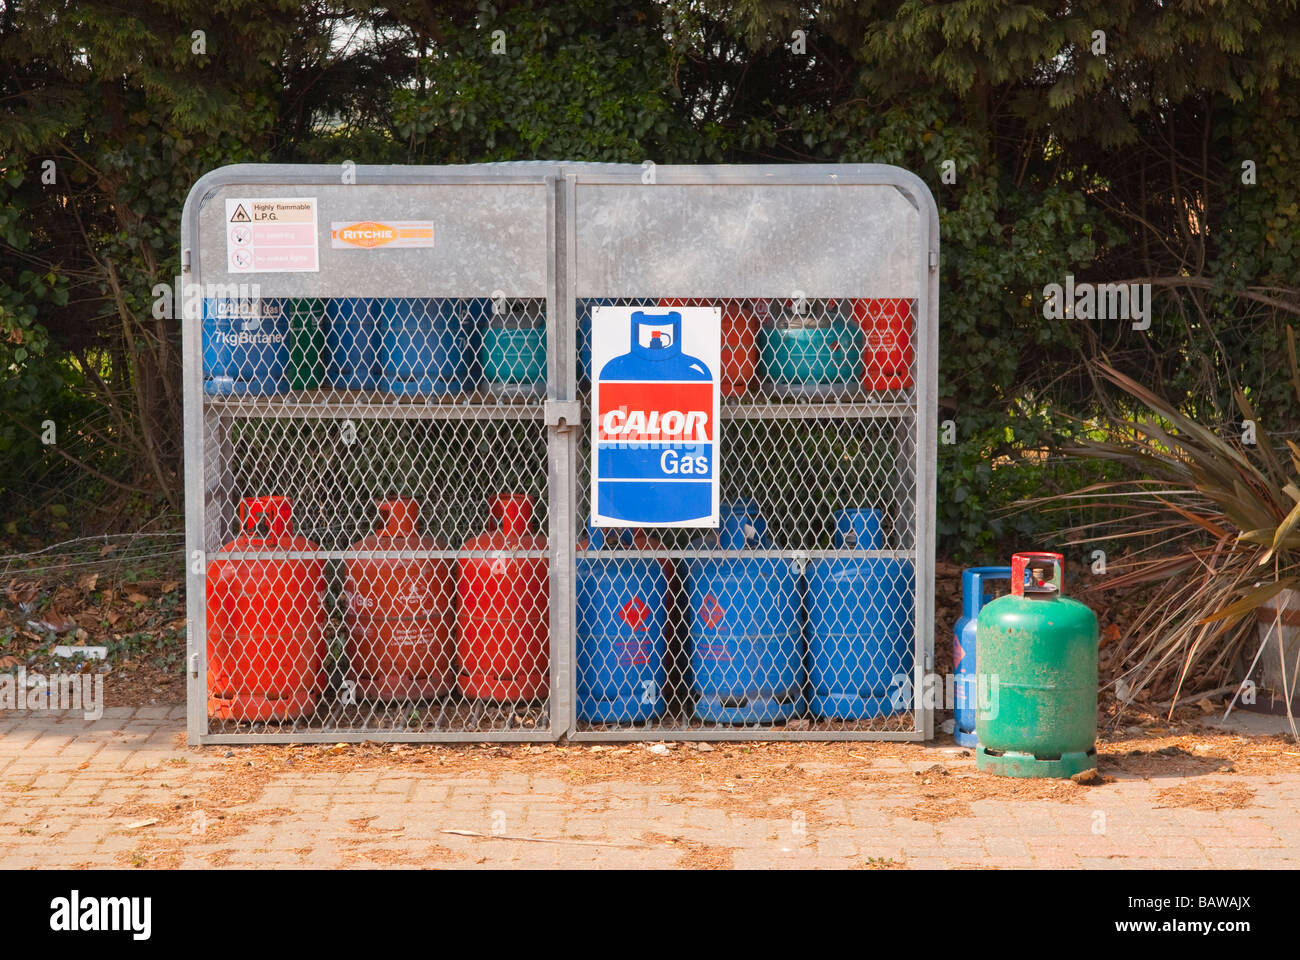 A cage with butane and propane gas bottles in for sale at a uk garden centre selling gases Stock Photo